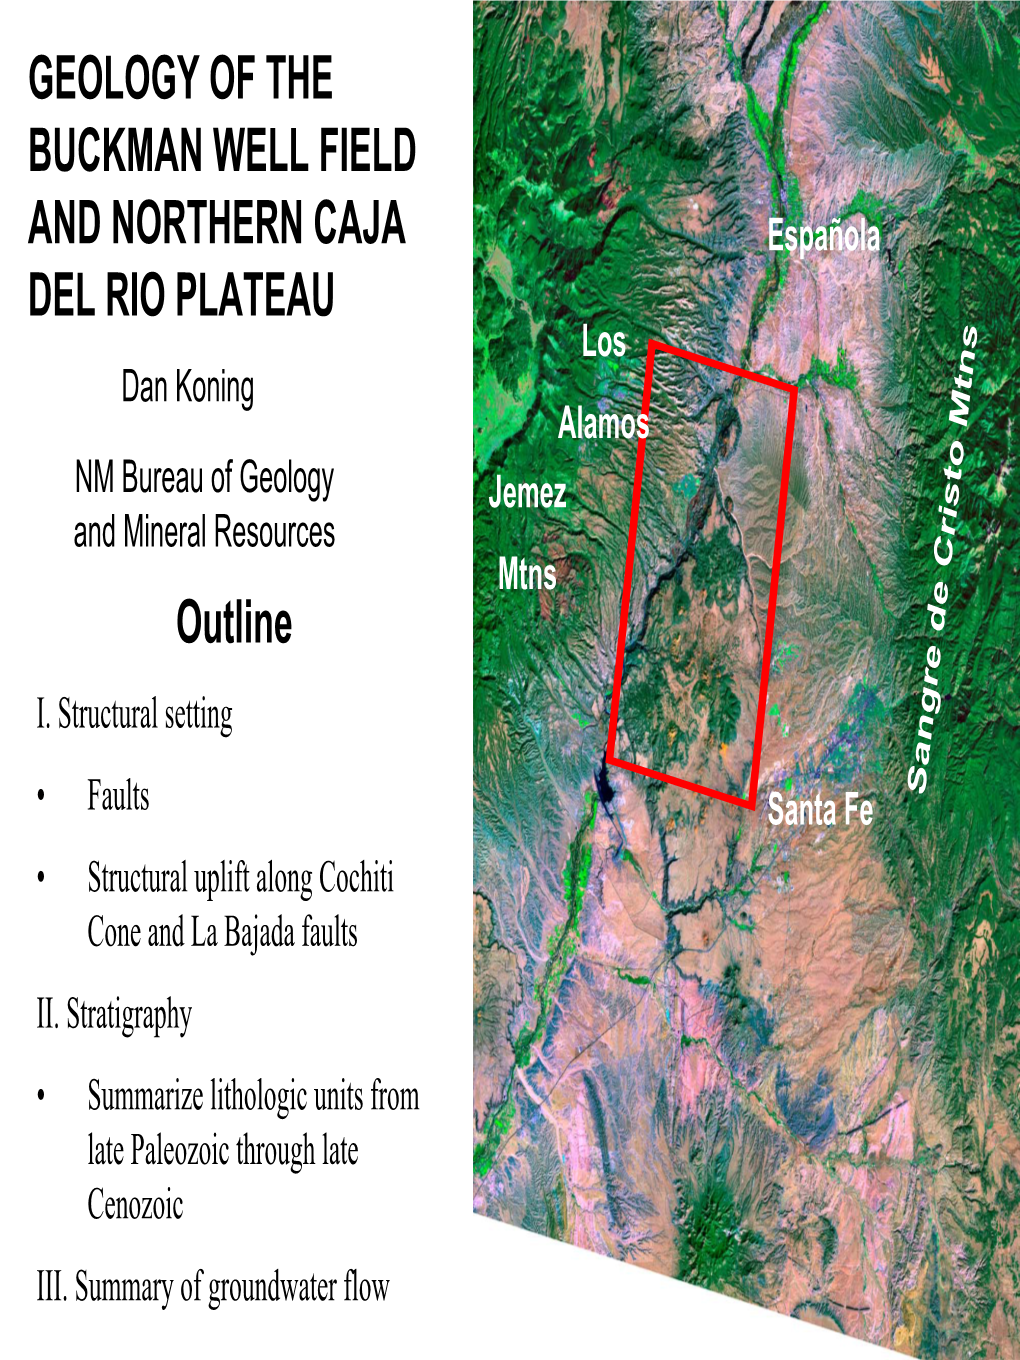 Geology of the Buckman Well Field and Northern Caja Del Rio Plateau